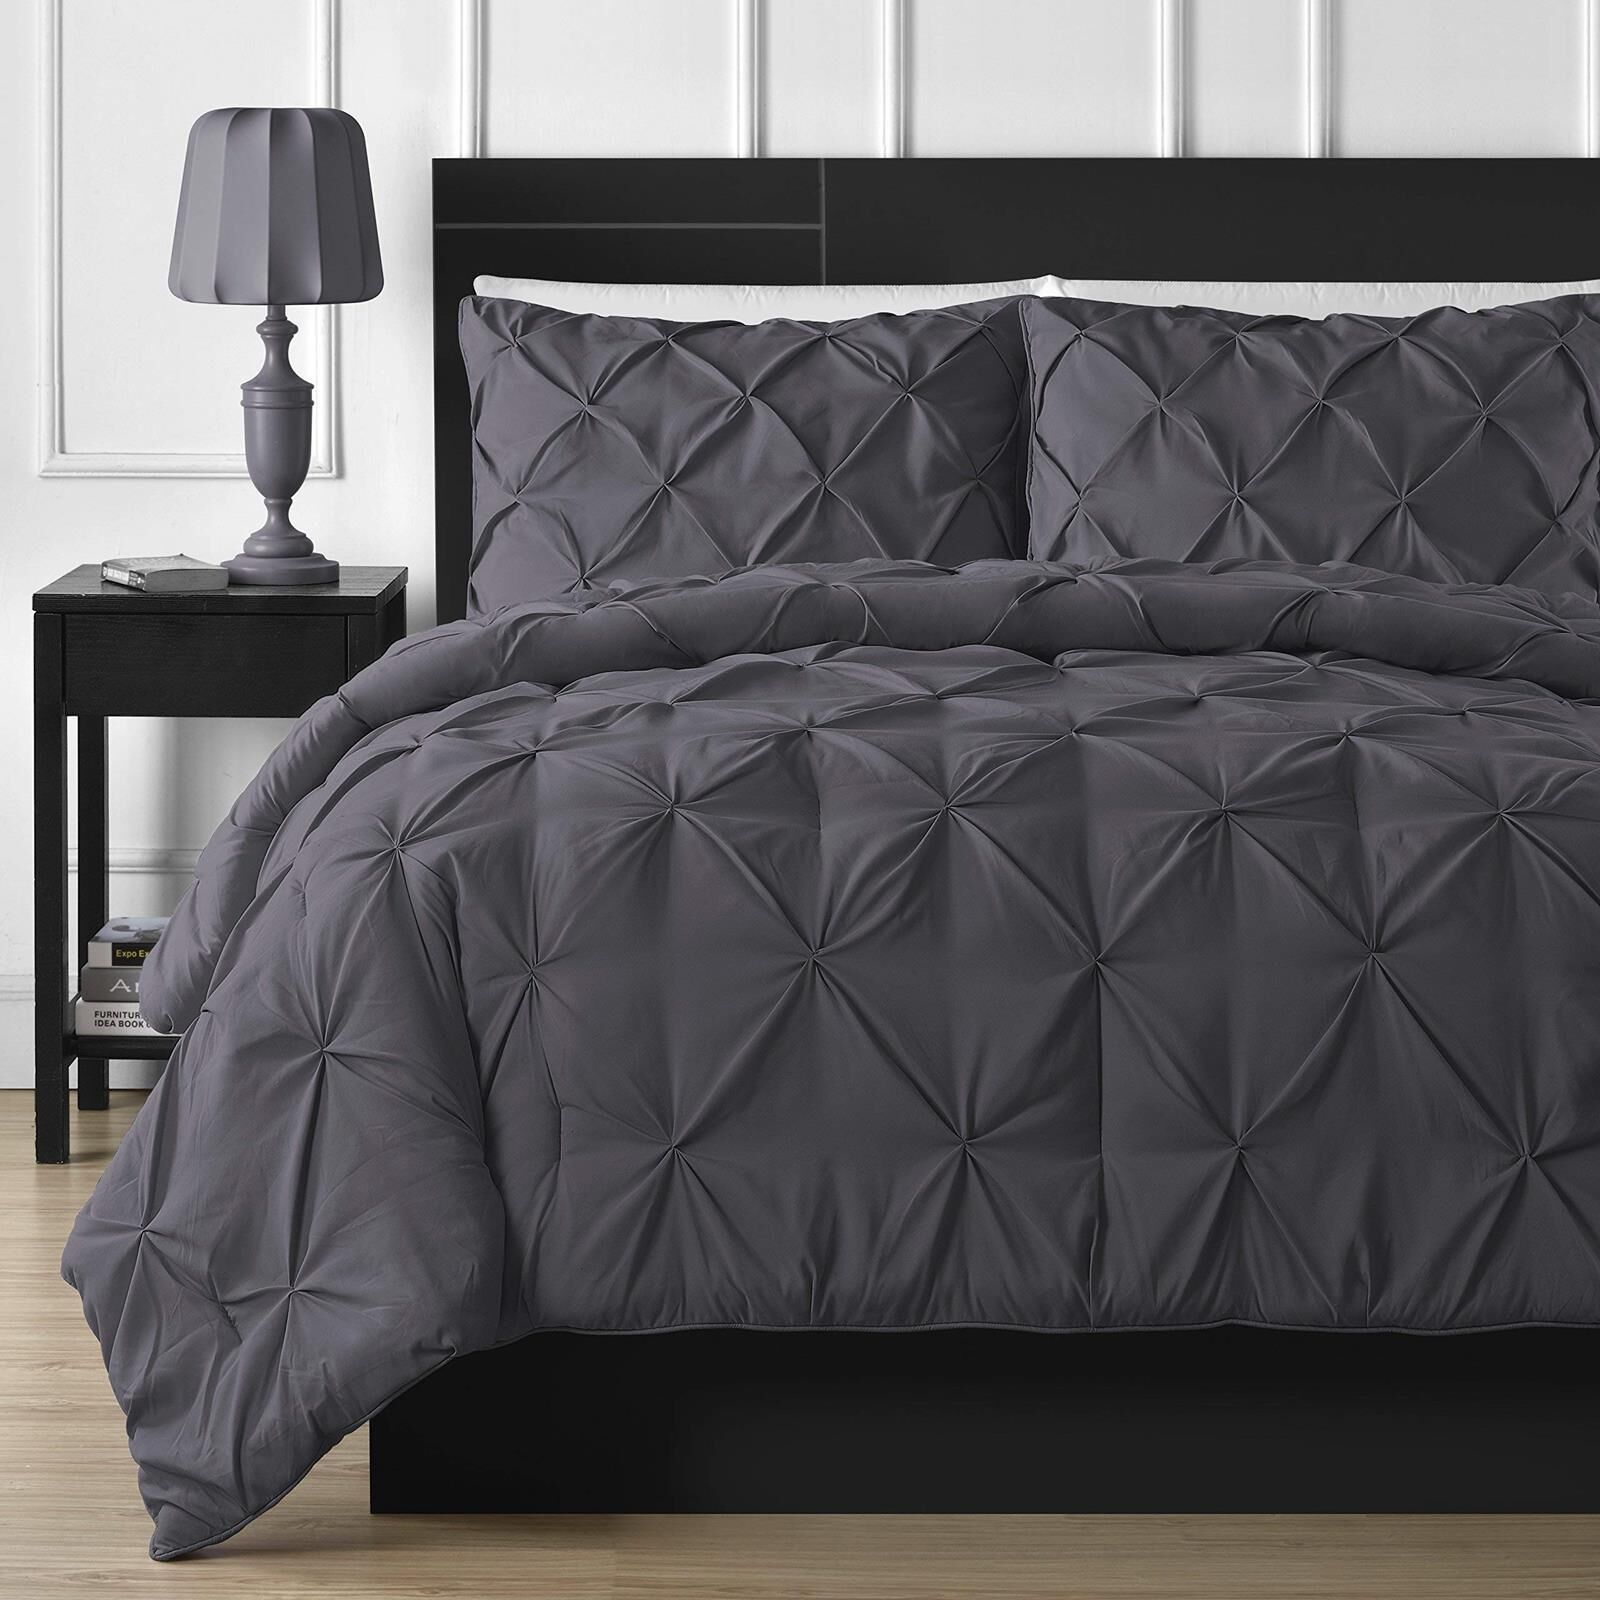 Diamond Grey Bed Sheet Set with Quilt, Pillow and Cushions Covers 02